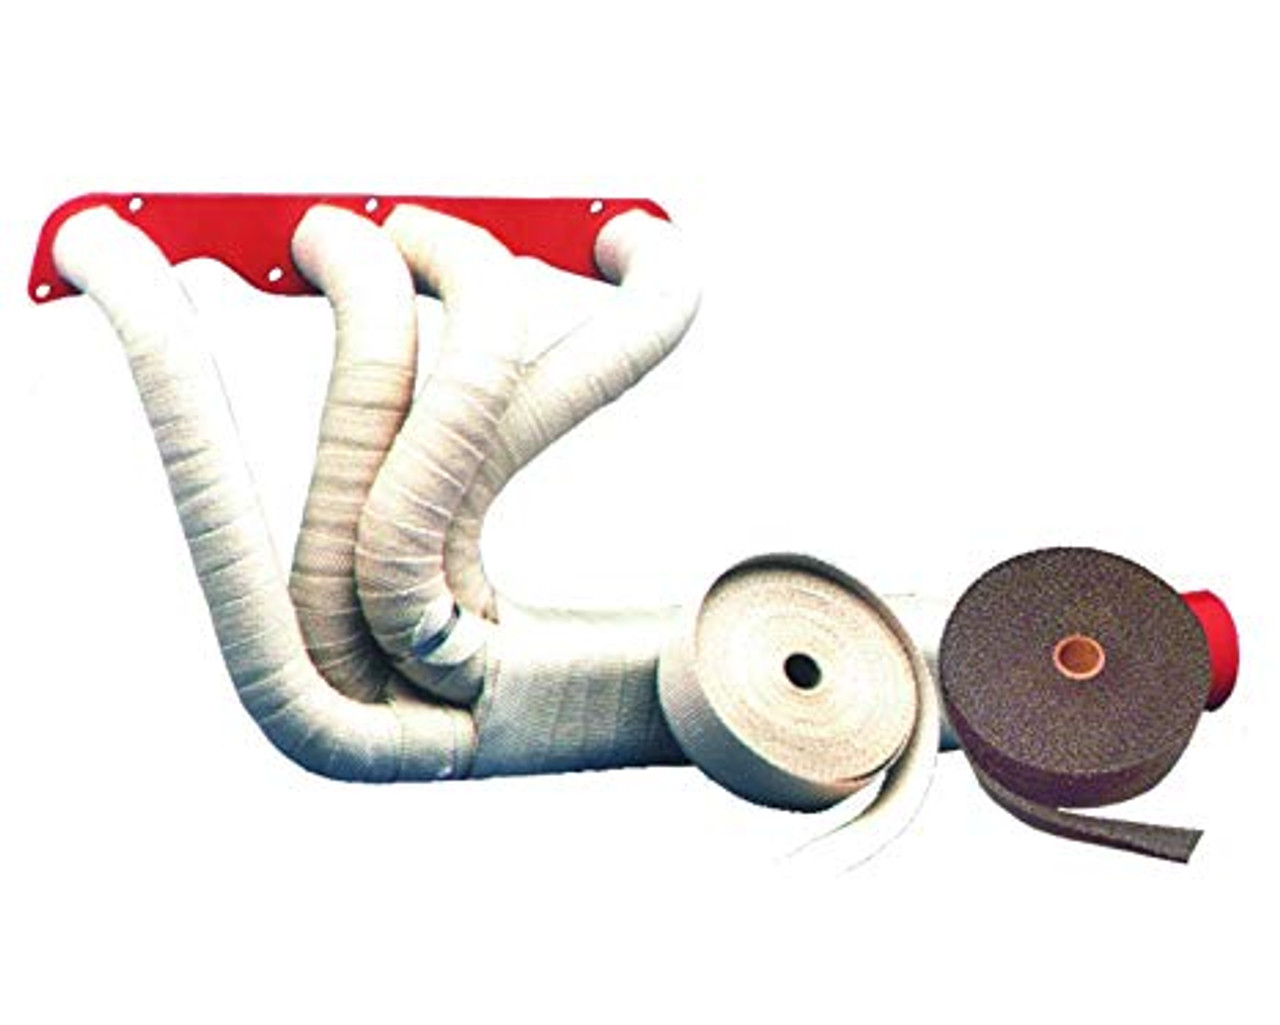 WHITE High Temperature Header Exhaust Pipe Insulation Wrap Kit: 2 Rolls  each 2 INCH WIDE X 25 FEET LONG with Stainless Steel Zip Ties Kit- Thermal  Zero - WT116225TKX2